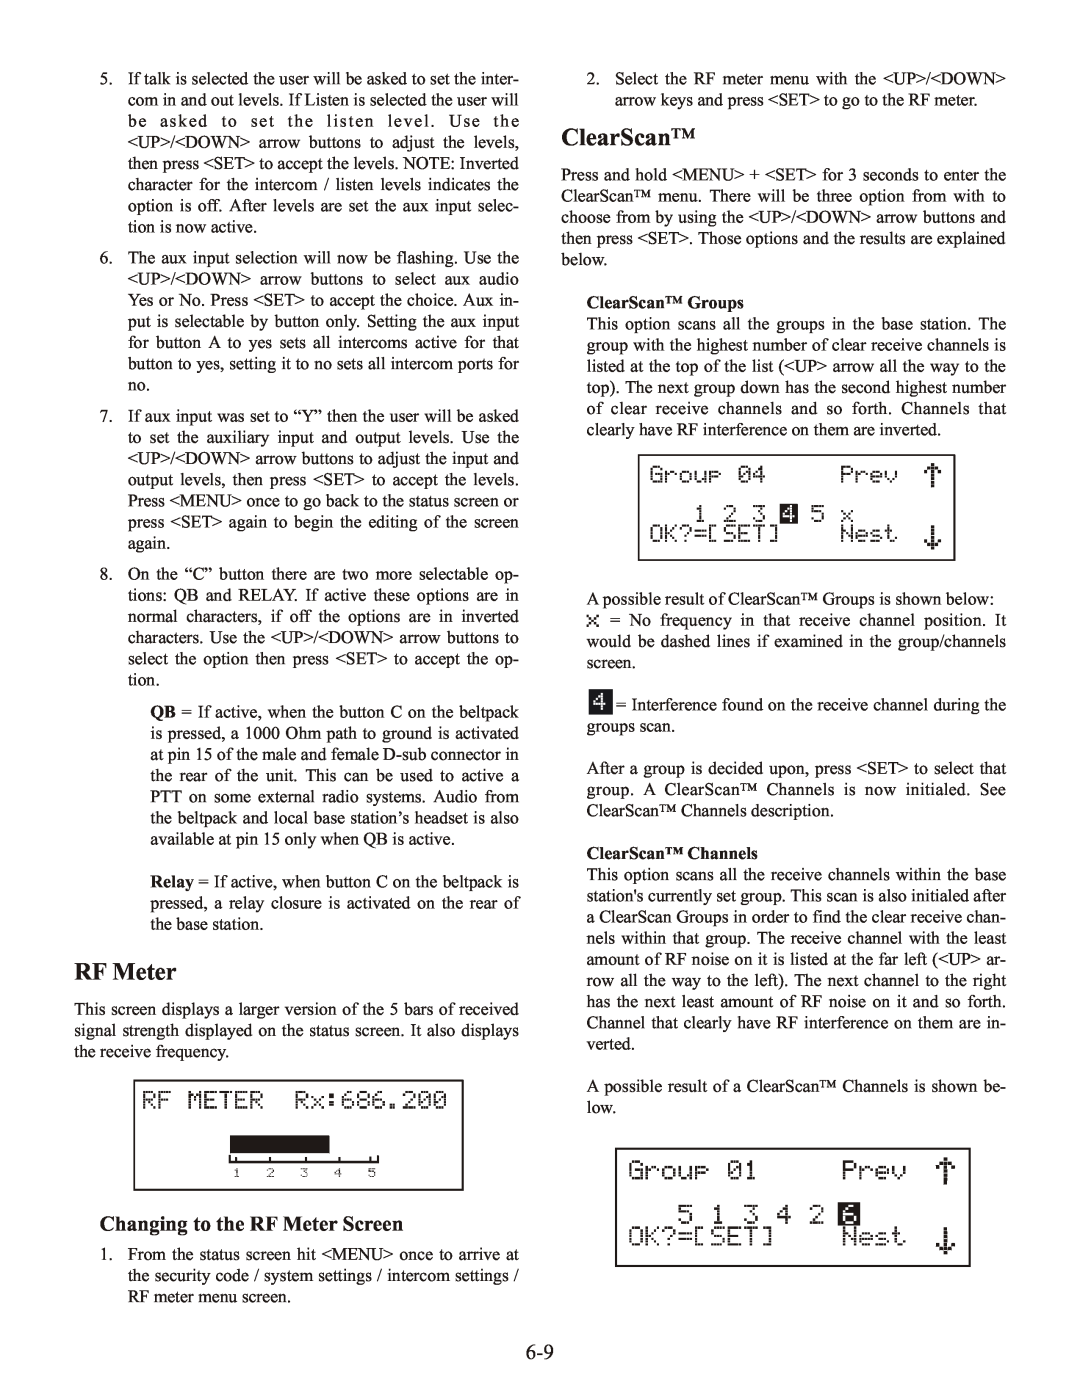 Telex BTR-1 operating instructions Changing to the RF Meter Screen, ClearScan Groups, ClearScan Channels 